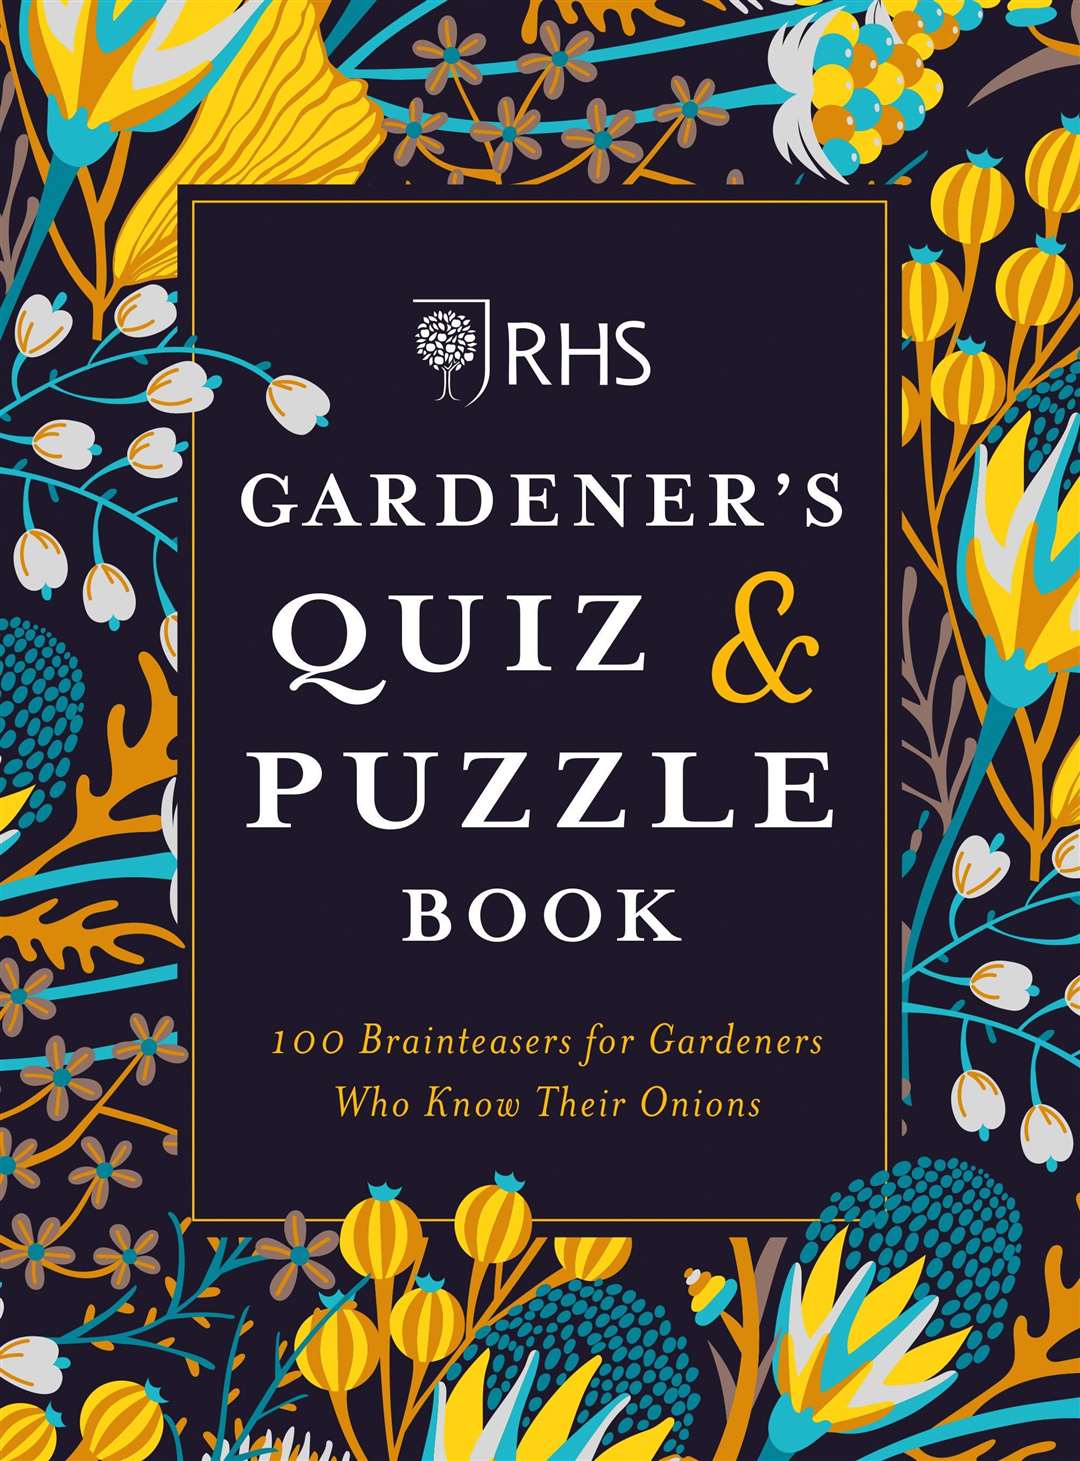 RHS Gardener's Quiz & Puzzle Book by Simon Akeroyd & Dr Gareth Moore. Picture: Mitchell Beazley/PA